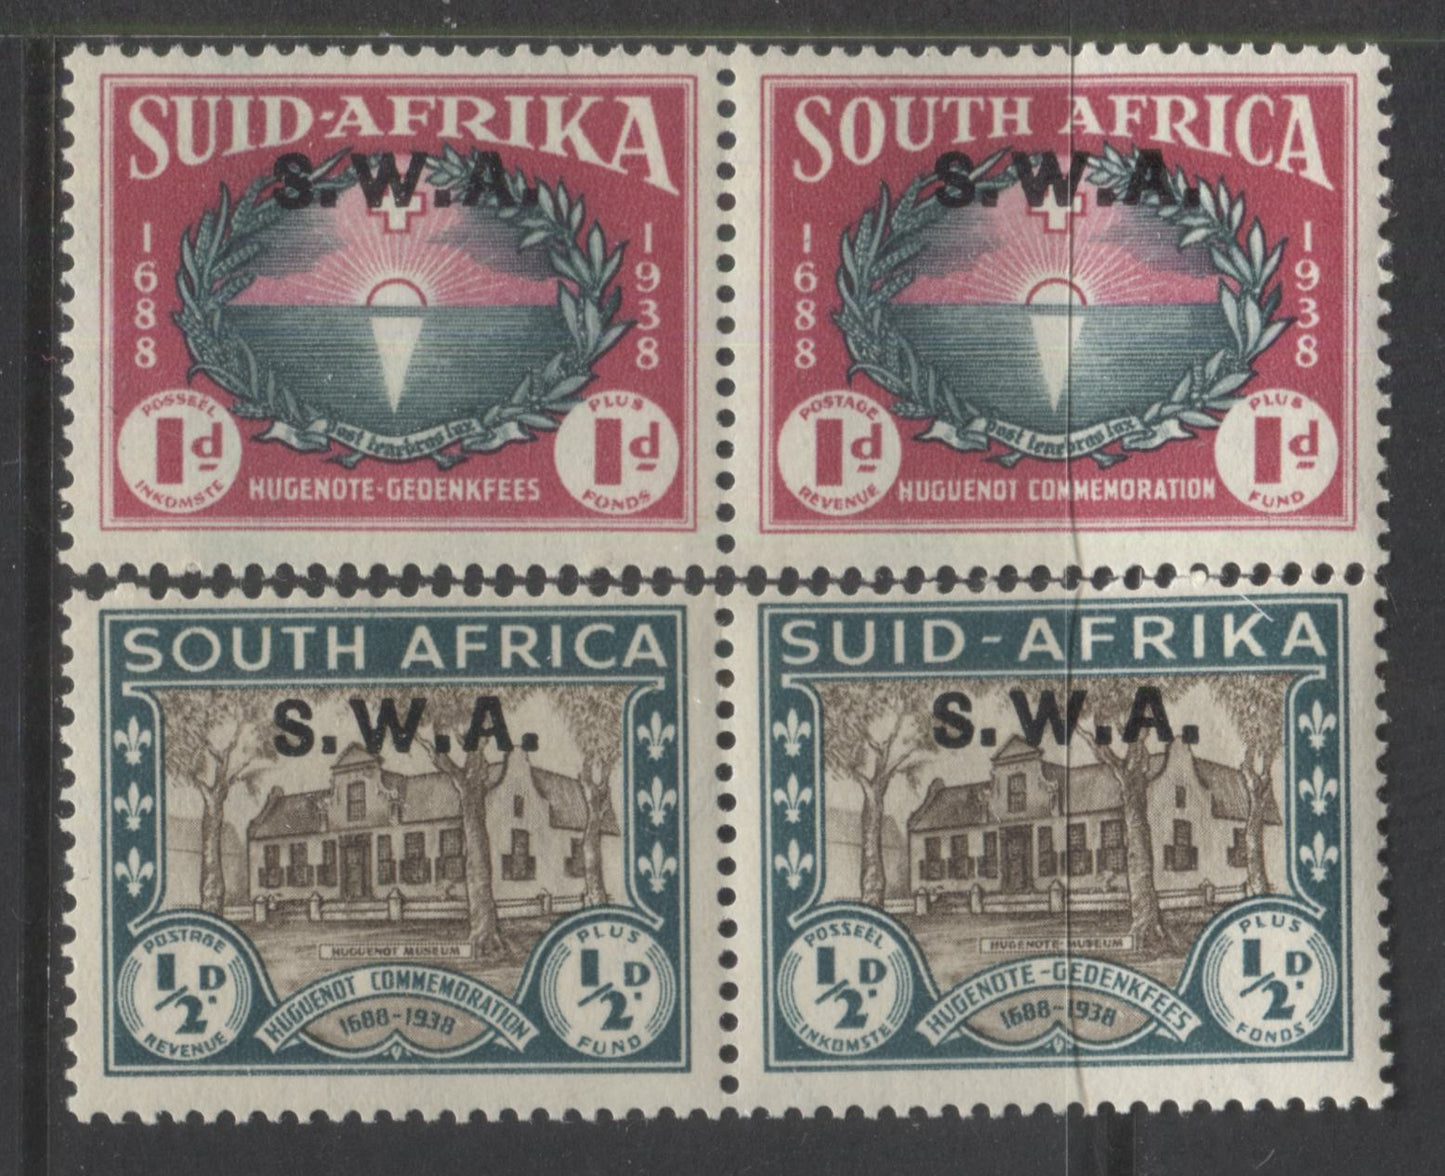 Lot 99 South West Africa SG#111-112, 1939 250th Anniversary Of Huguenot Landing Overprinted Issue, 2 Fine NH and VFNH Pairs, Perf 14, Mult Springbok's Head Watermark, SG. Cat. 37 GBP = $63.64